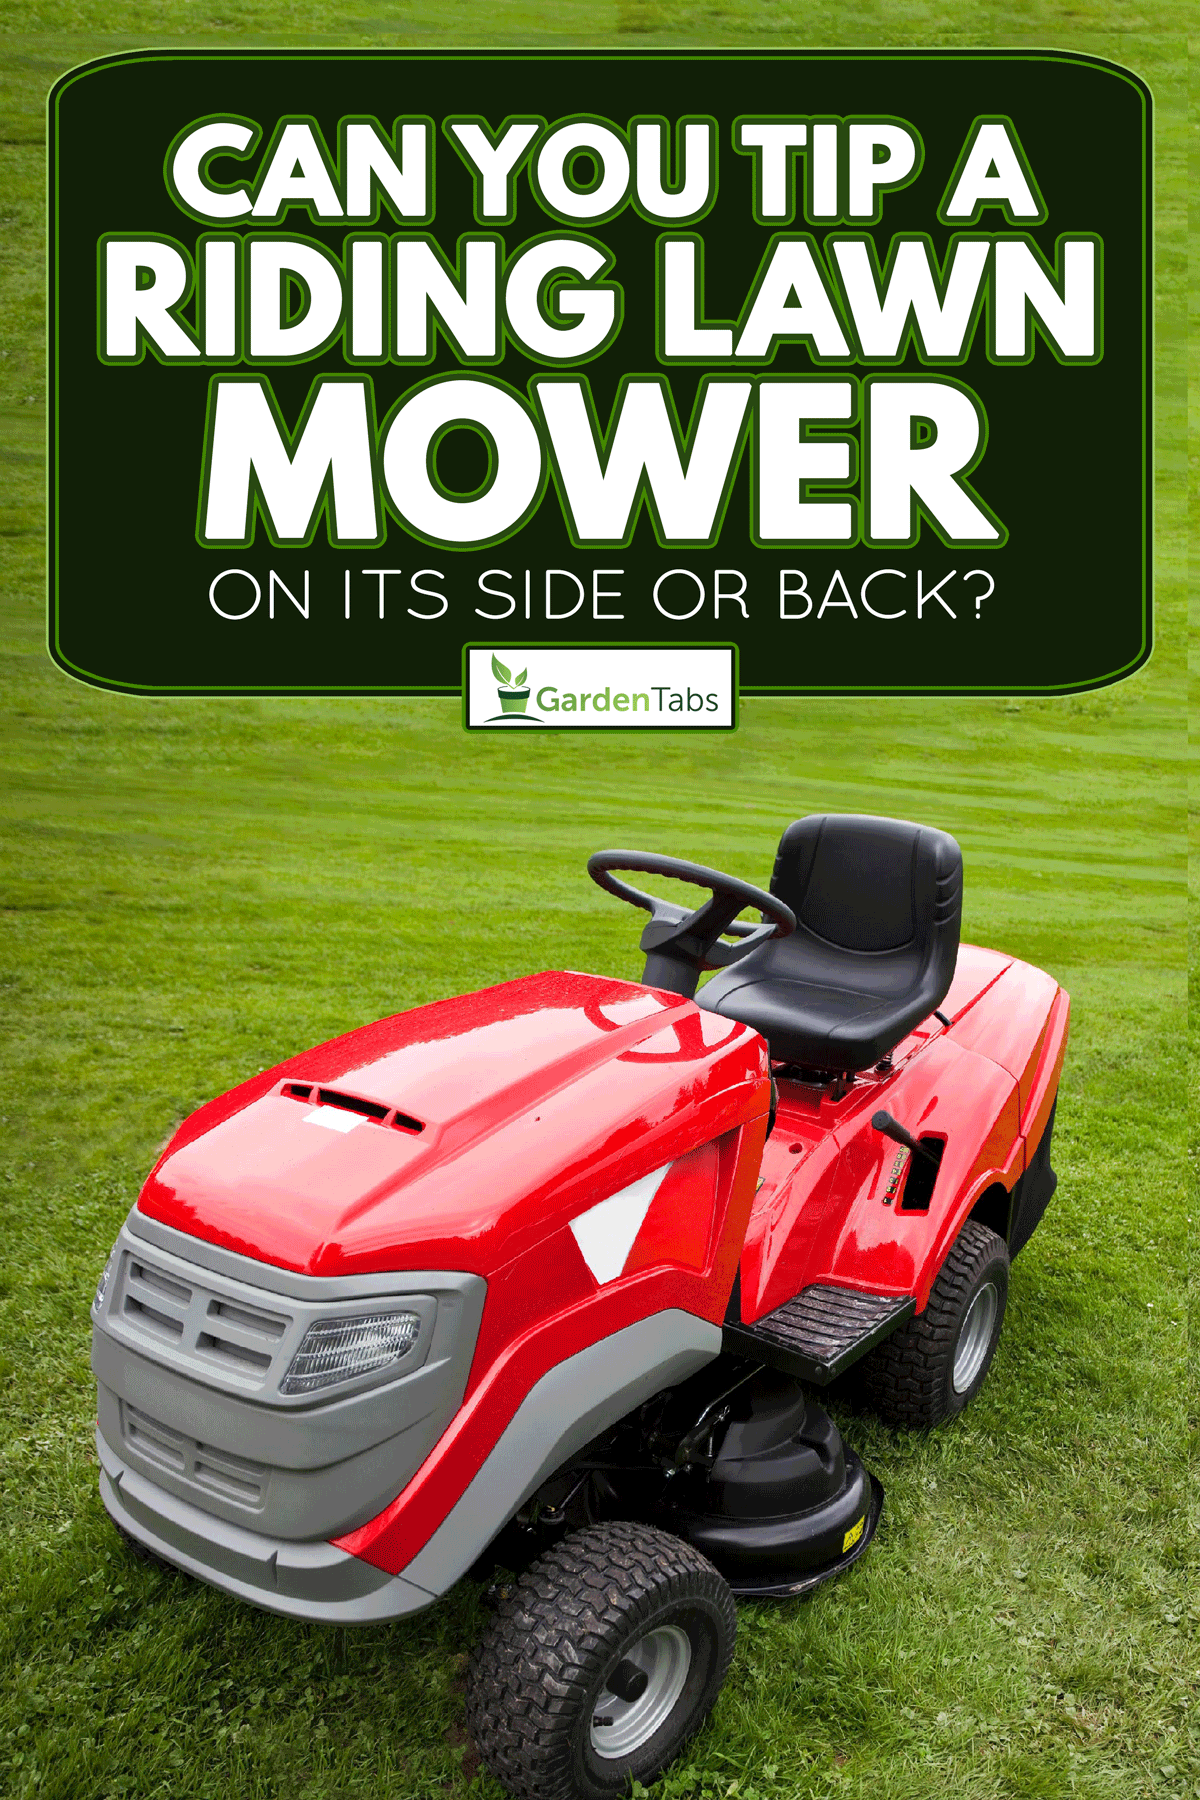 Red lawn mower parked on the grassy lawn, Can You Tip A Riding Lawn Mower On Its Side Or Back?